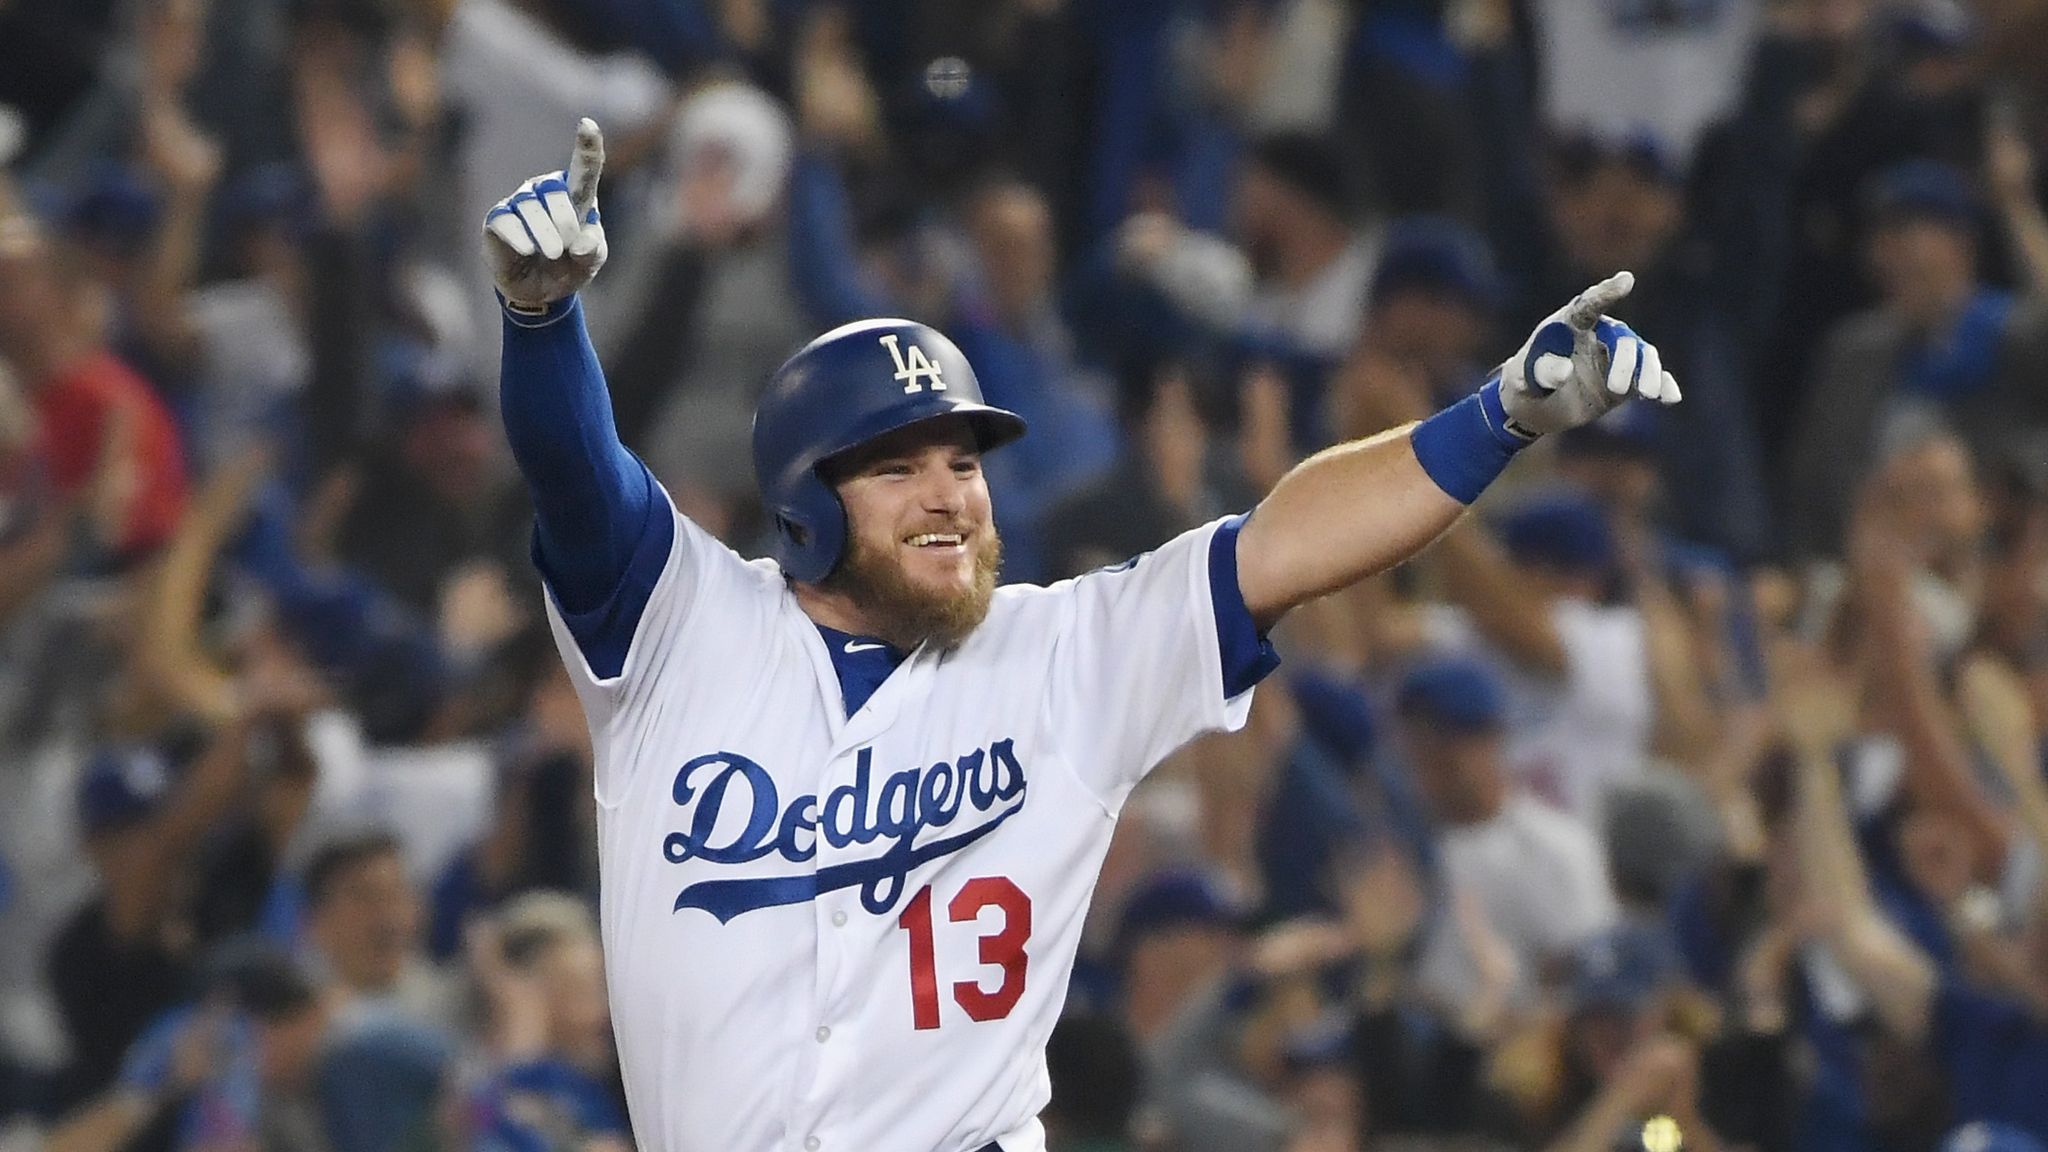 Red Sox beat Dodgers in Game Five to win World Series